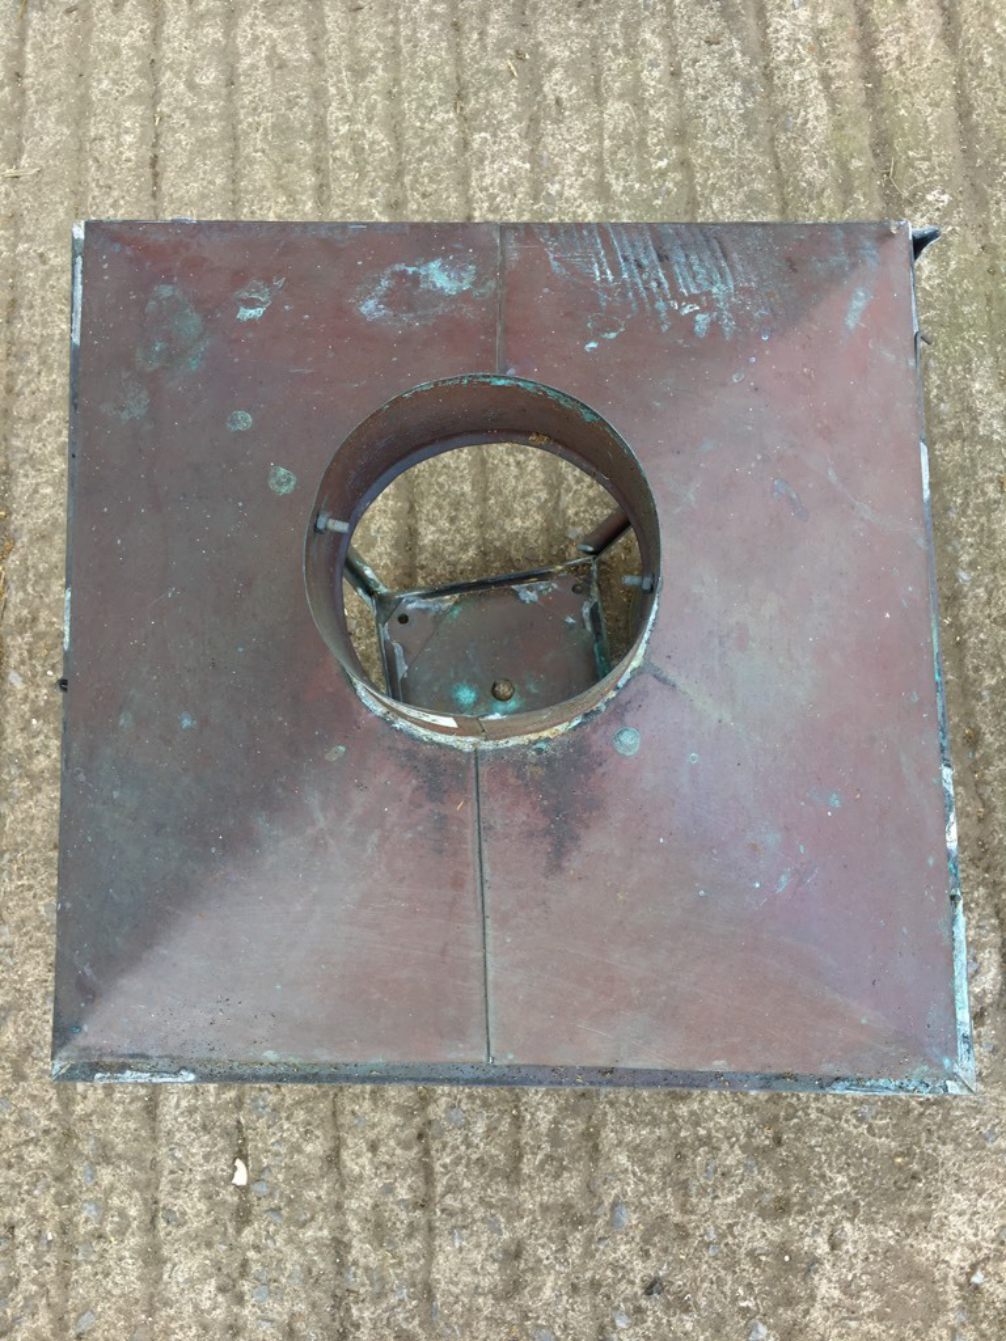 36”x17x17” Salvaged Large Copper Lamp Top Needs Repair